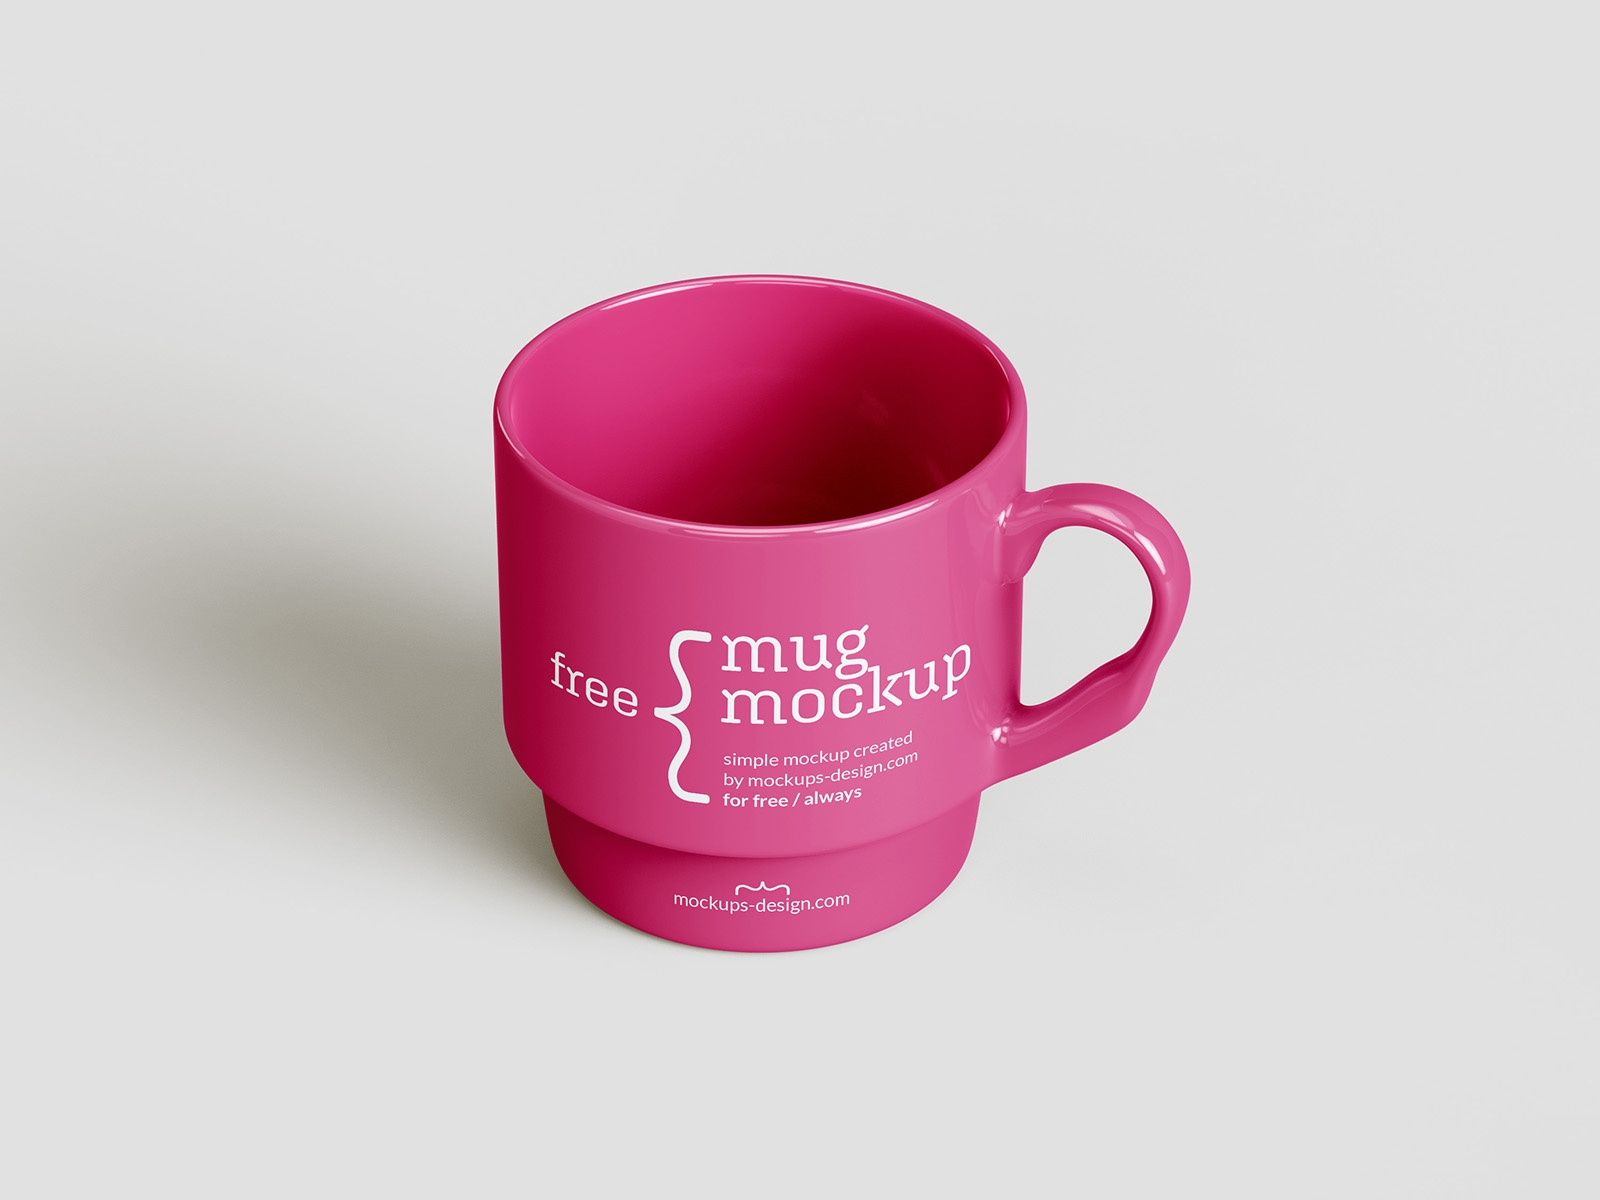 Front and Perspective View of 4 Ceramic Mug Mockups FREE PSD